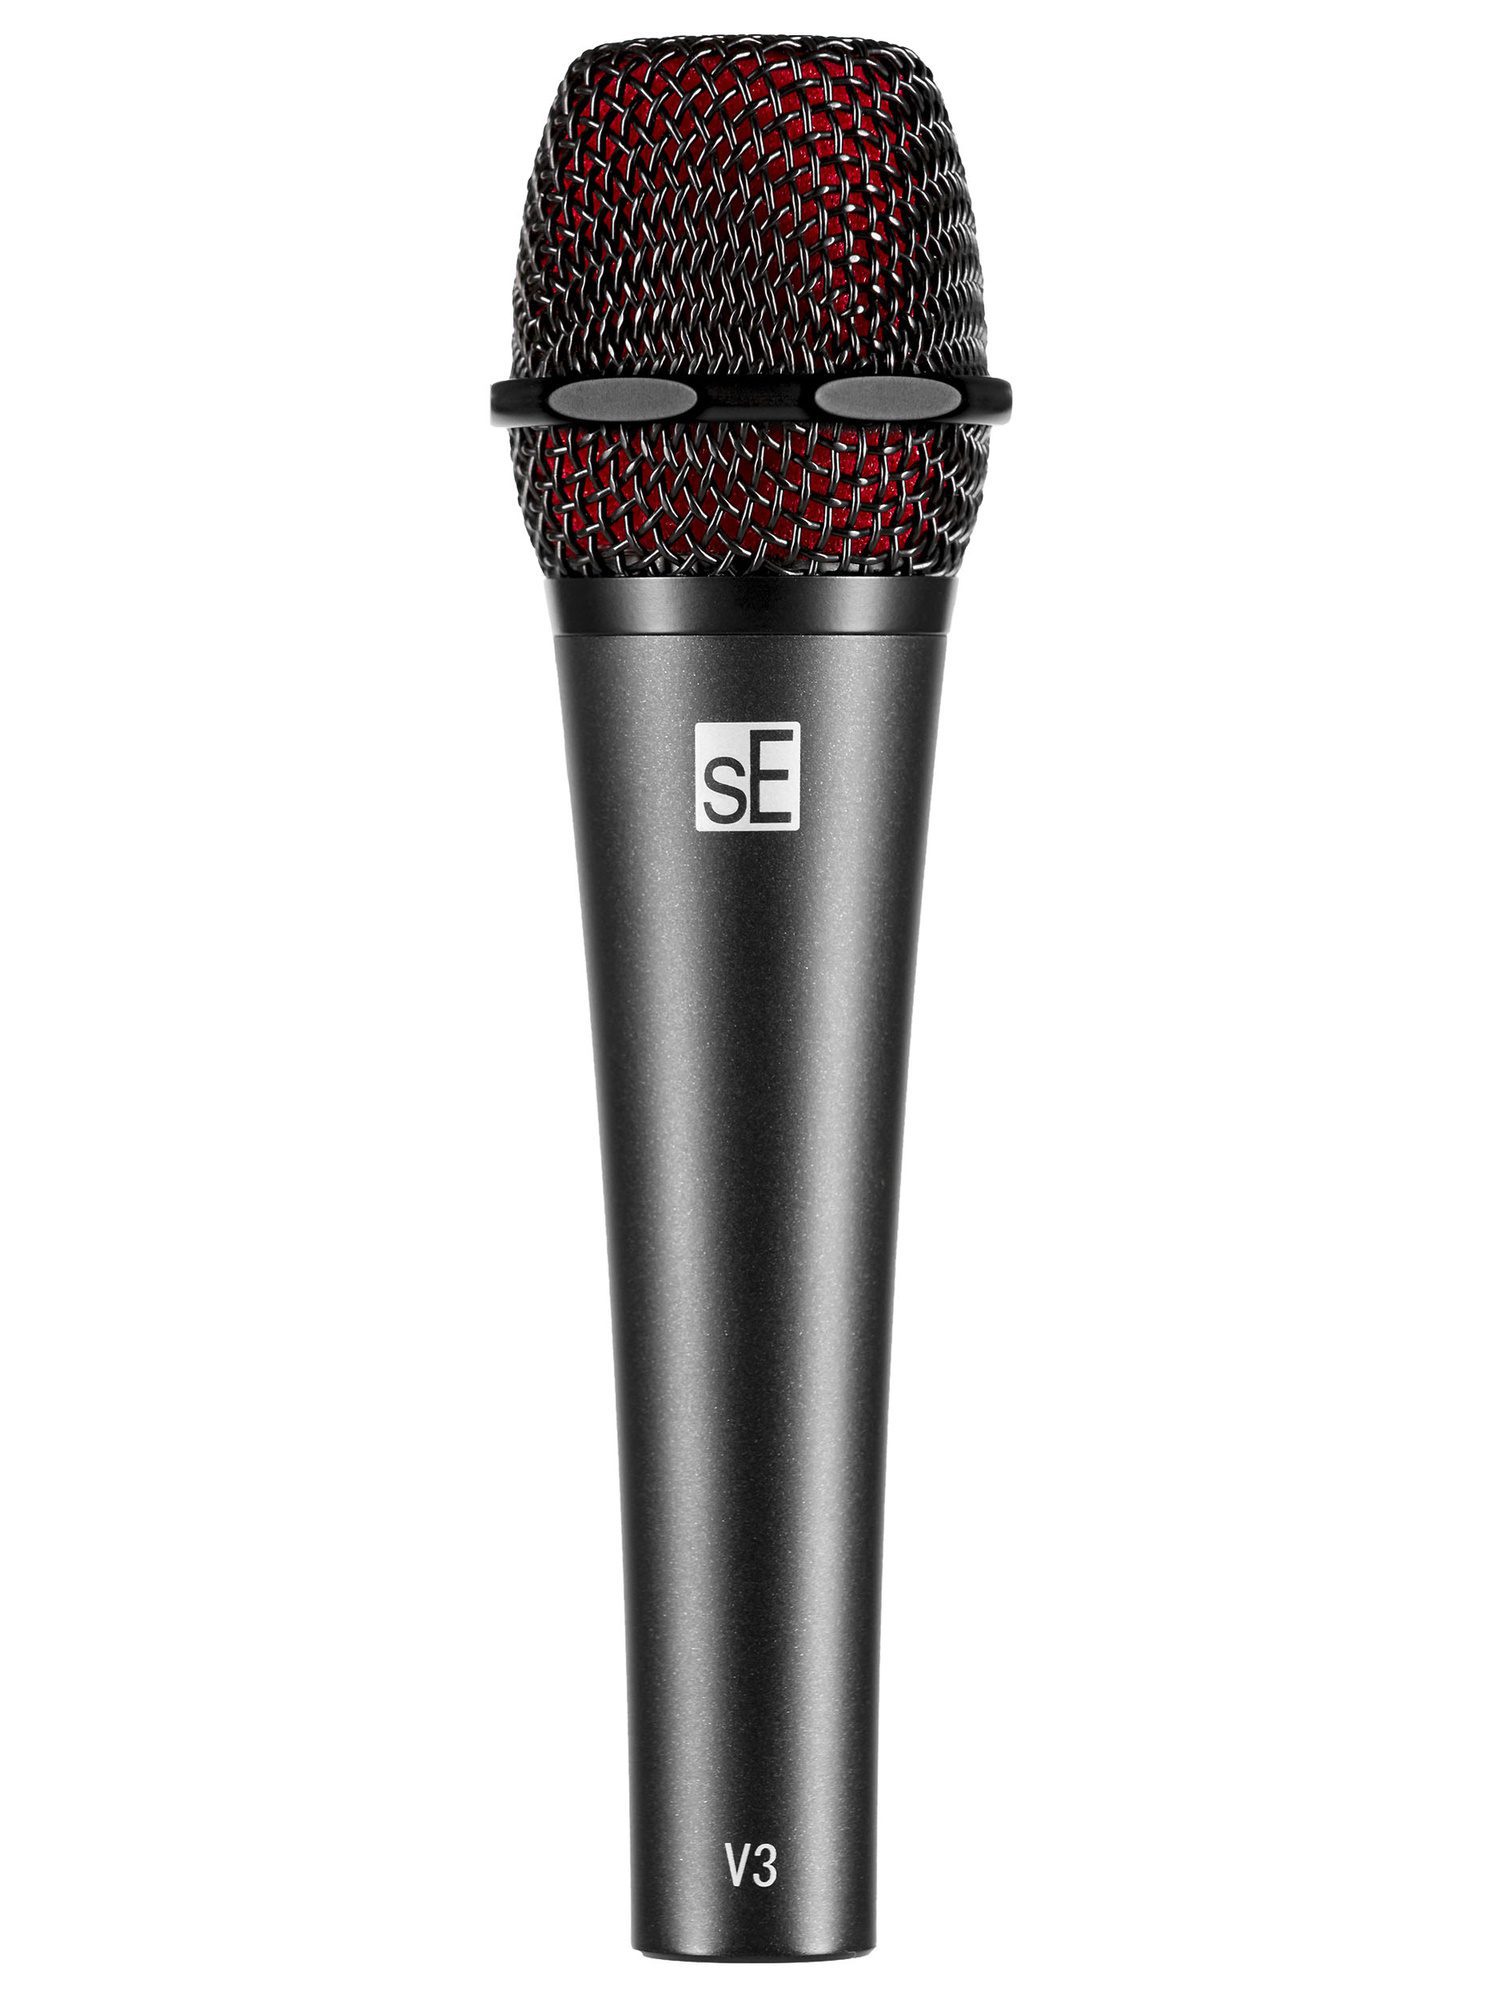 SE V3 All Purpose Dynamic Cardioid Microphone